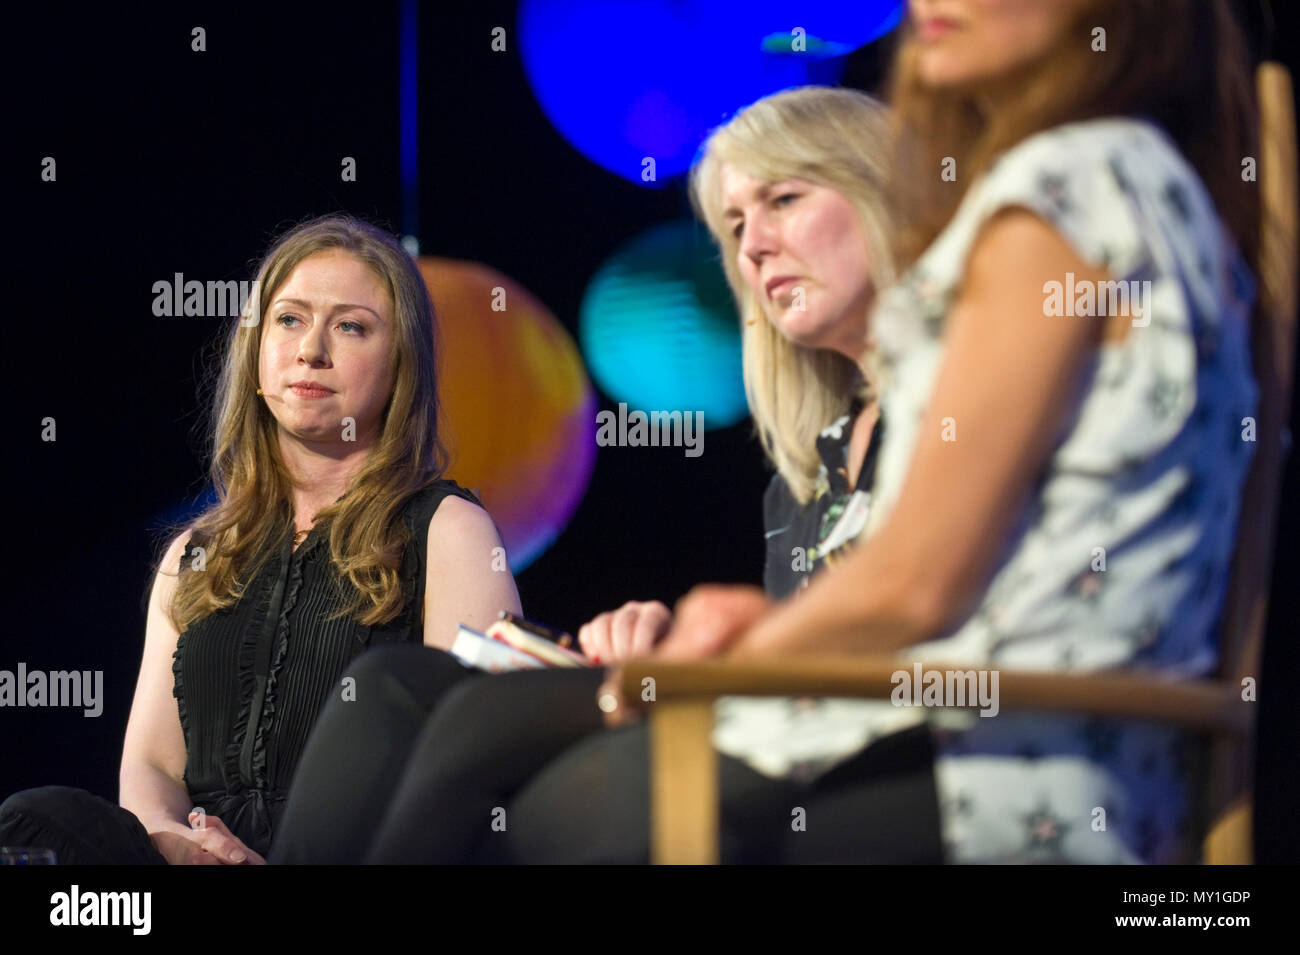 Chelsea Clinton campaigner & author speaking on stage at Hay Festival 2018 Hay-on-Wye Powys Wales UK Stock Photo